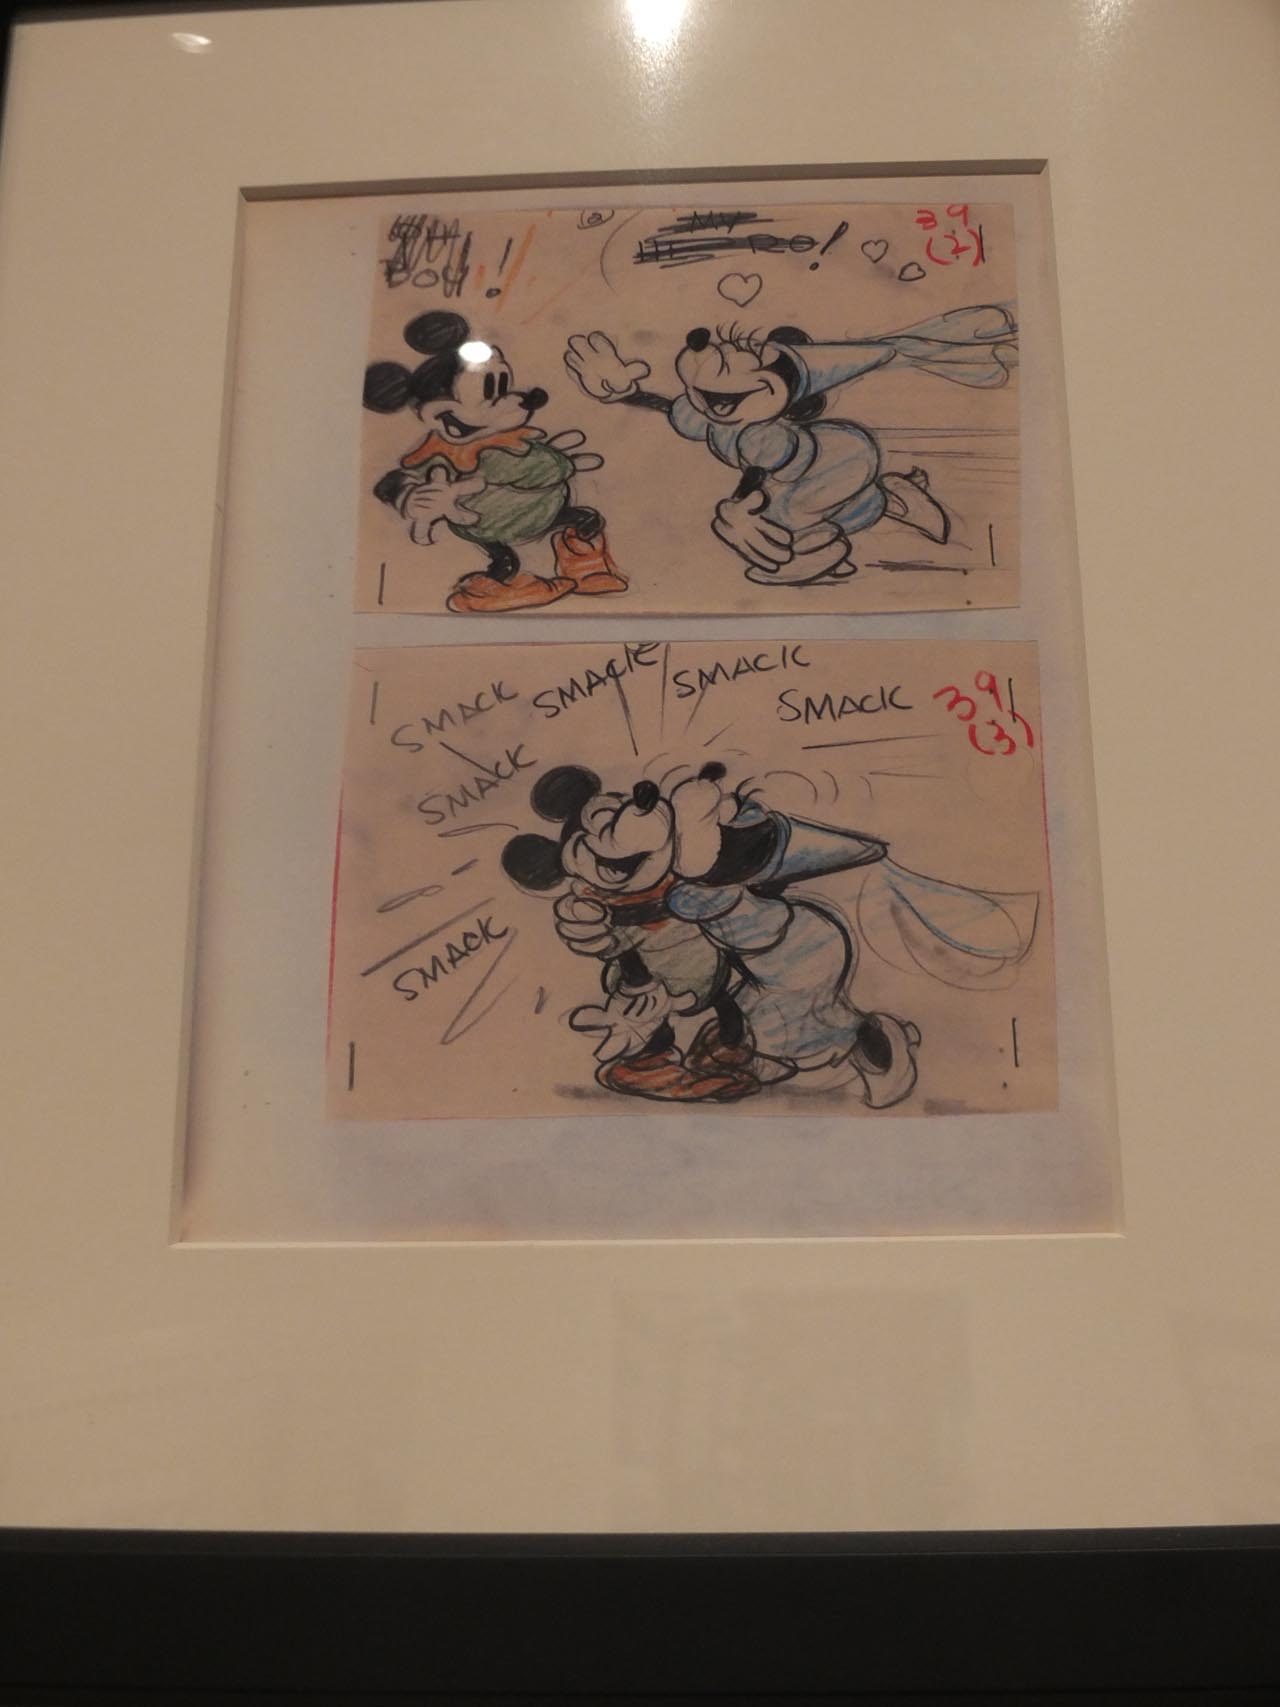 BRAVE LITTLE TAILOR. A draft sketch of Mickey and Minnie Mouse in 'Brave Little Tailor.' 